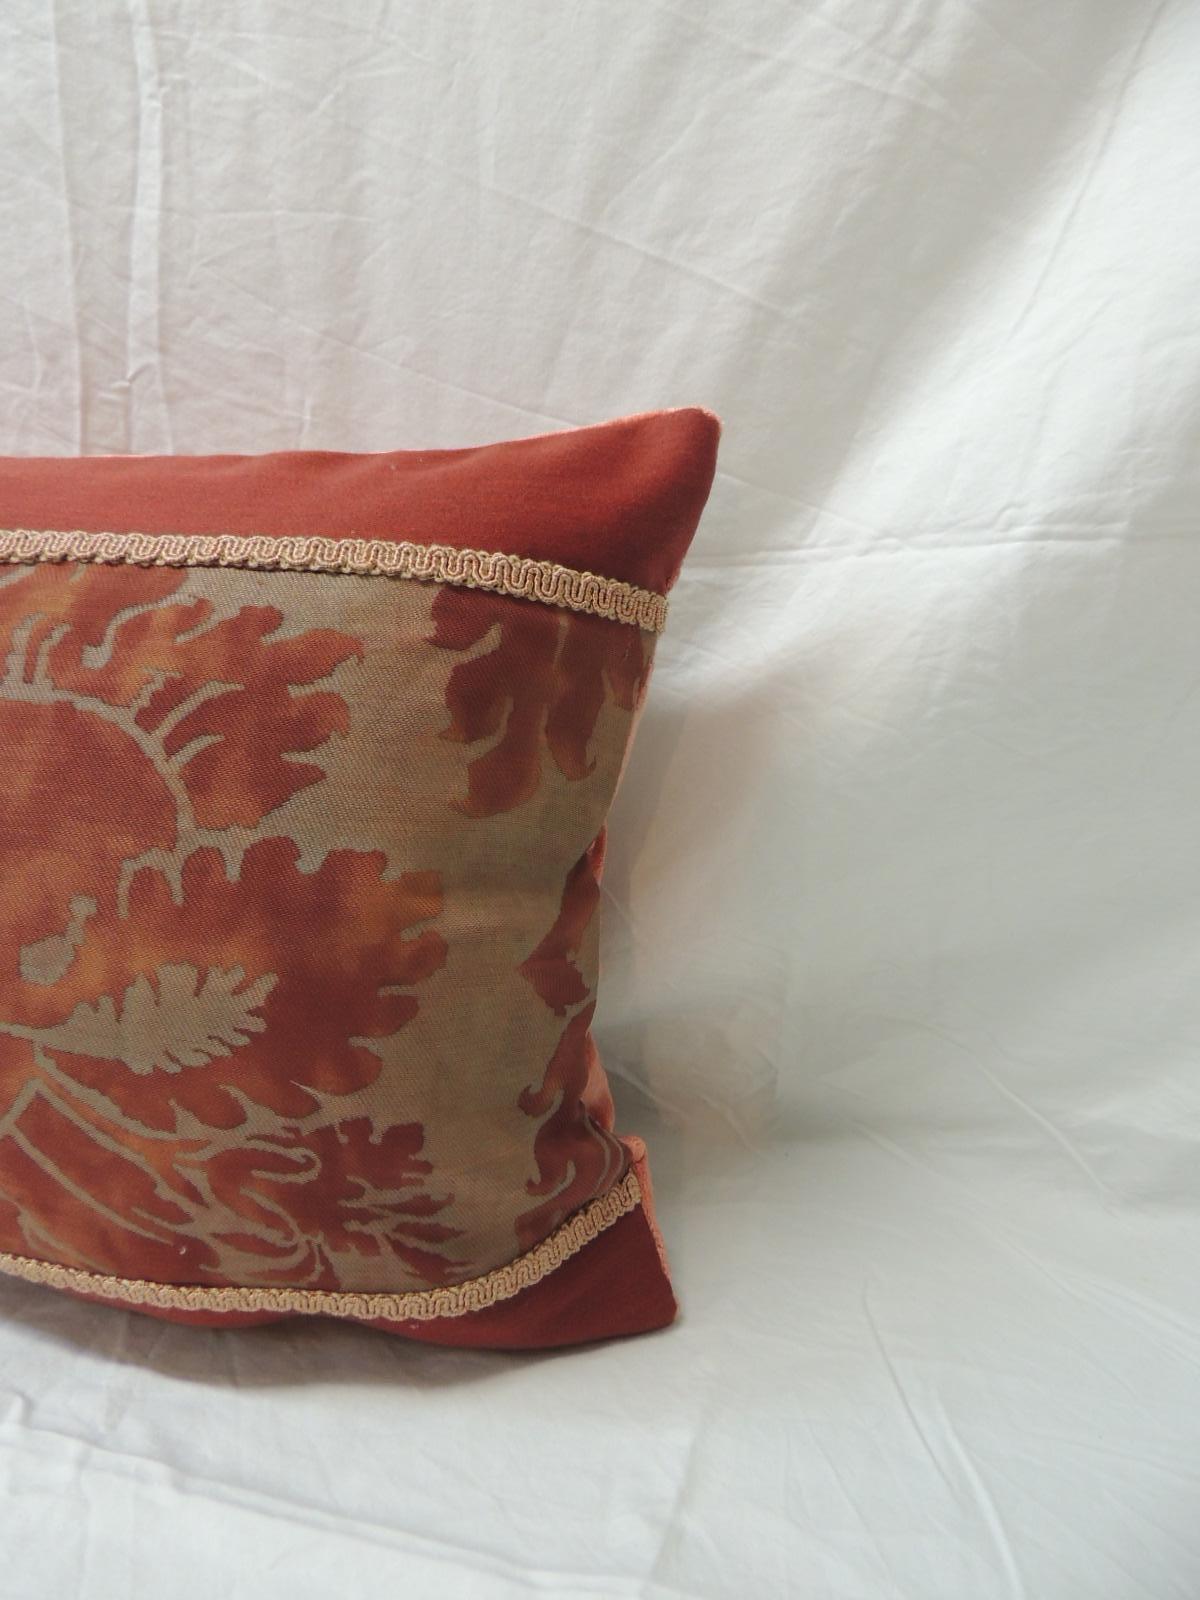 Vintage Fortuny “Glicine” pattern red and silvery decorative bolster pillow with red wool frame and orange woven decorative trim around.
Burnt orange silk velvet backing.
Decorative pillows handcrafted and designed in the USA. Closure by stitch